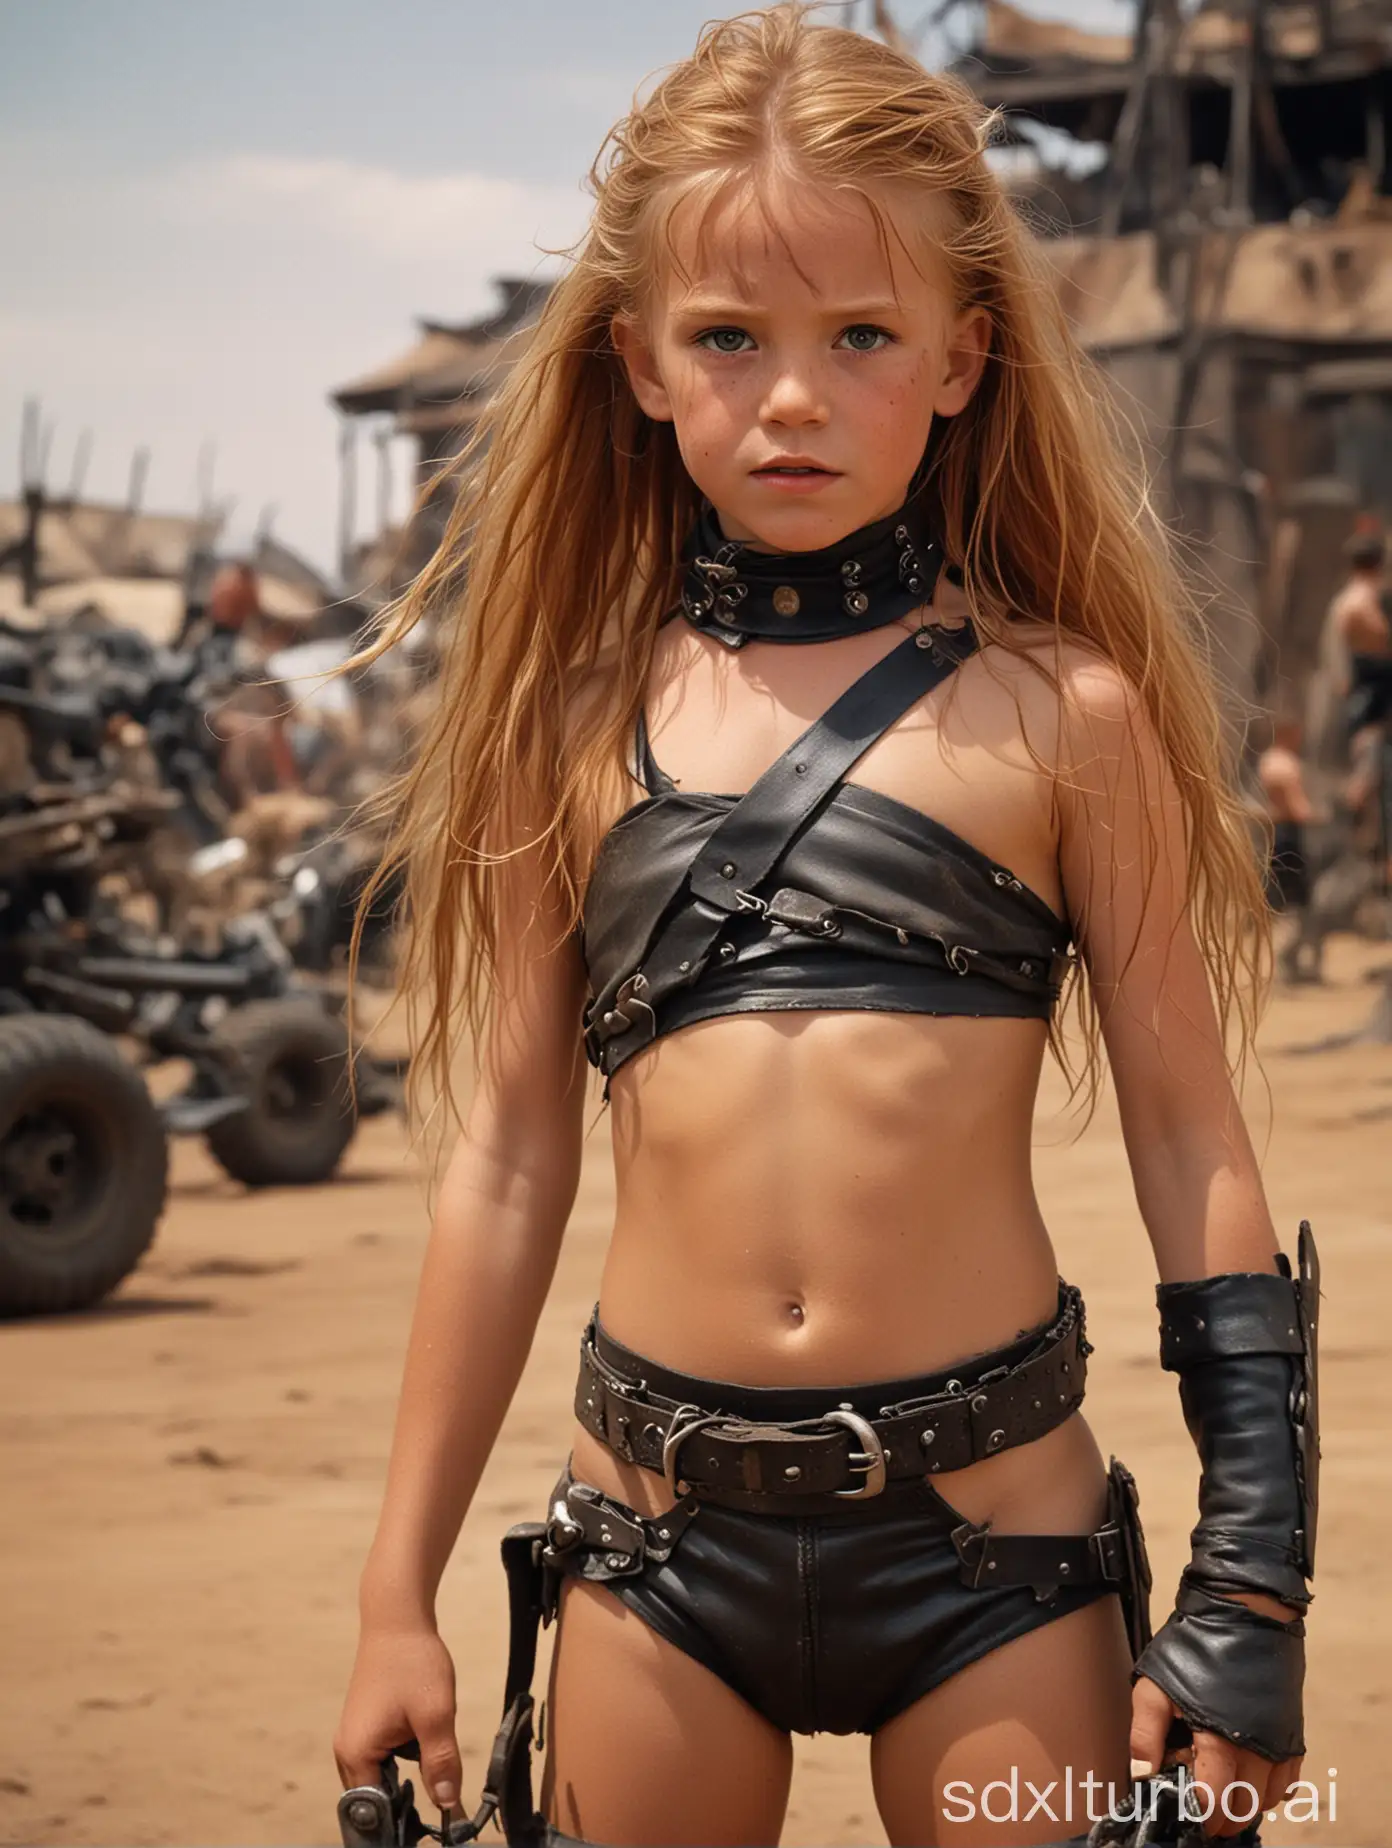 8 year old girl, leather bikini, choker, long ginger hair, exteremely muscular abs, in Mad Max Beyond Thunderdome